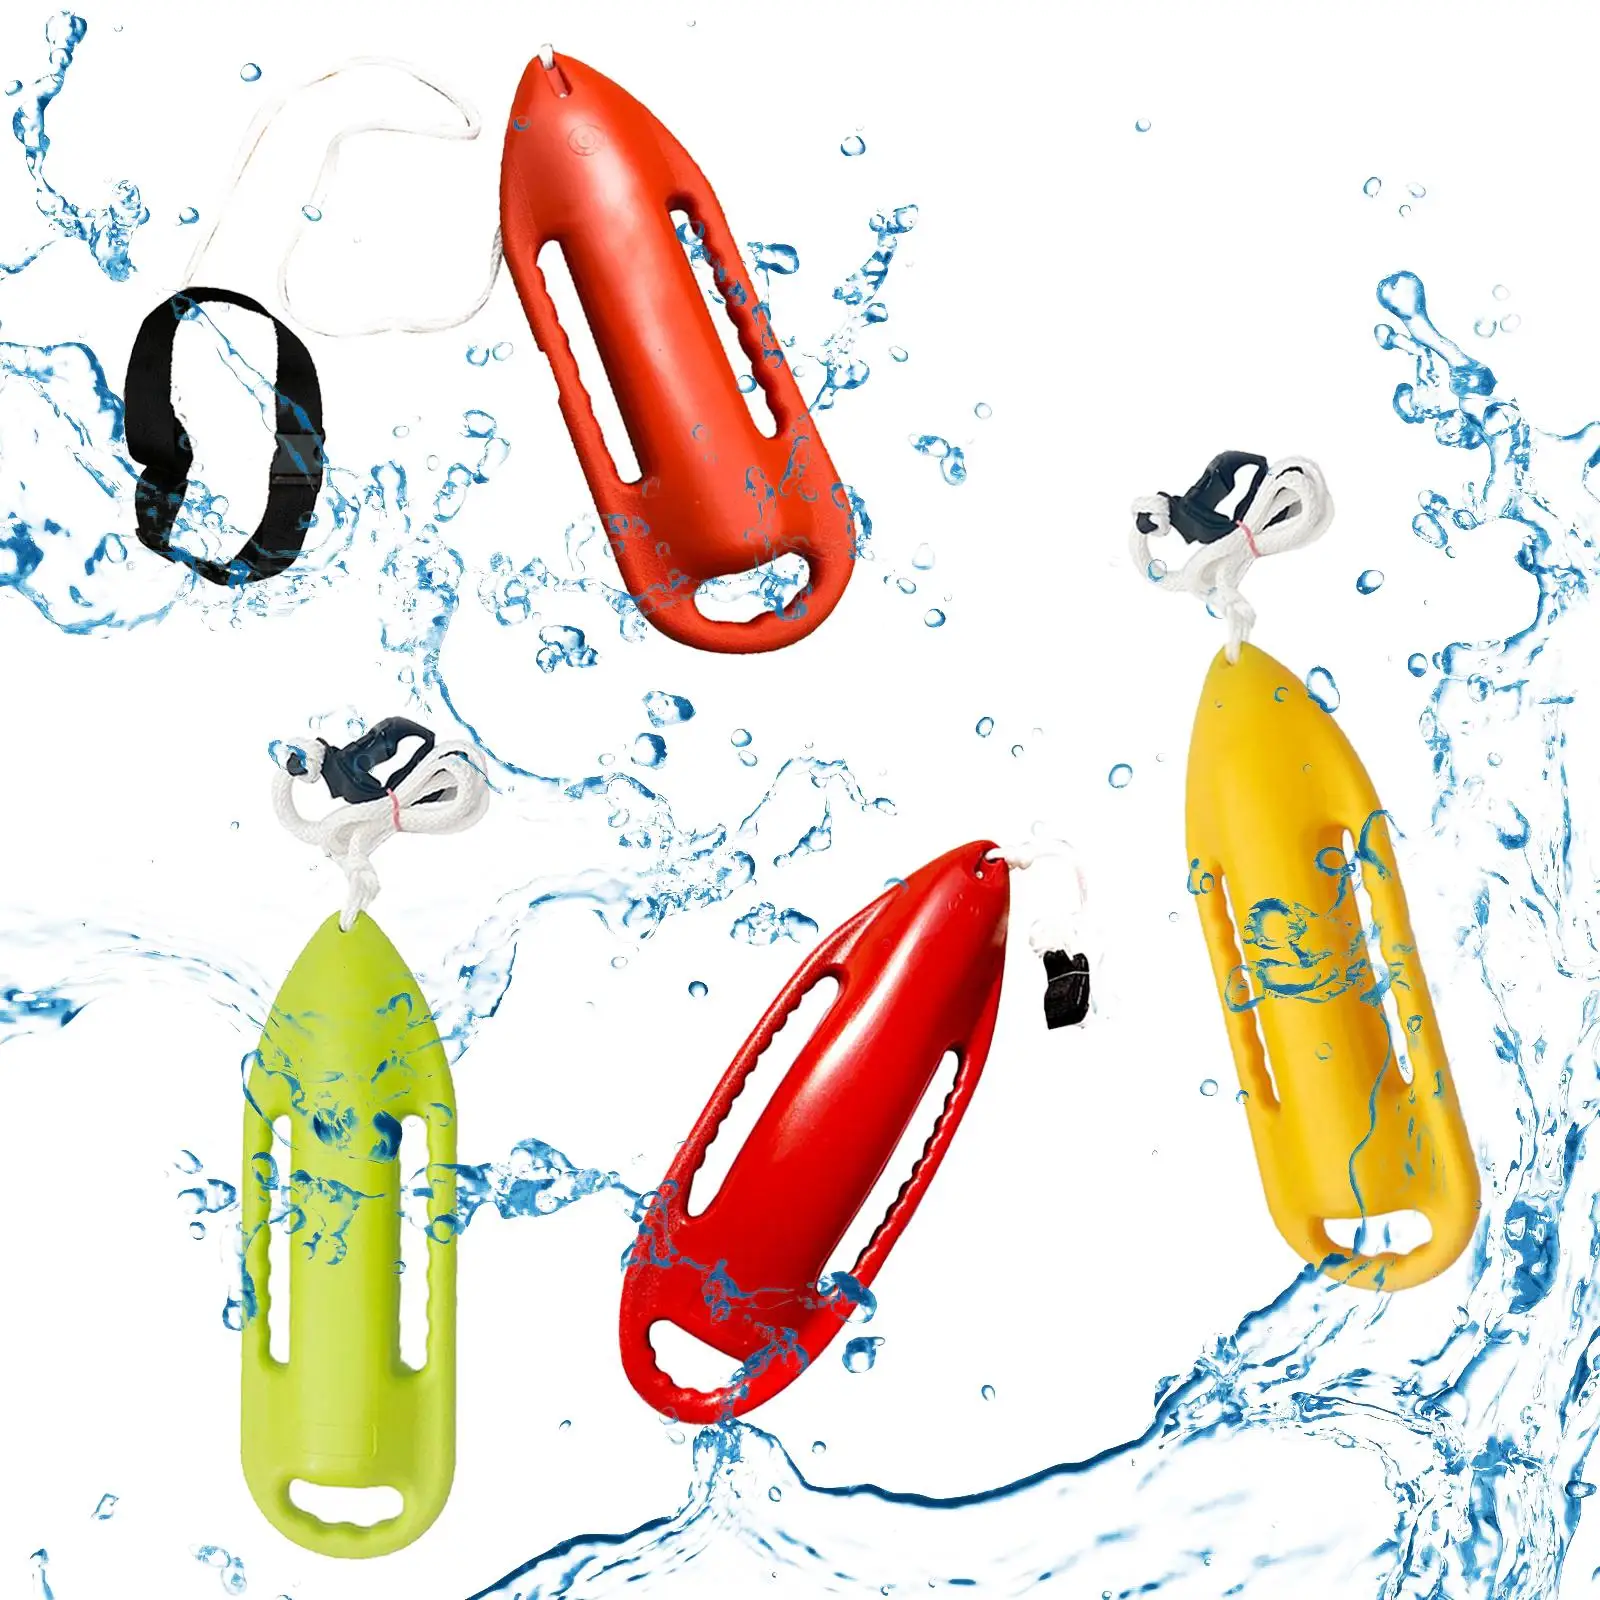 Float Swimming Buoy Floatation Swimming Can for Snorkeling Survival Kayaking